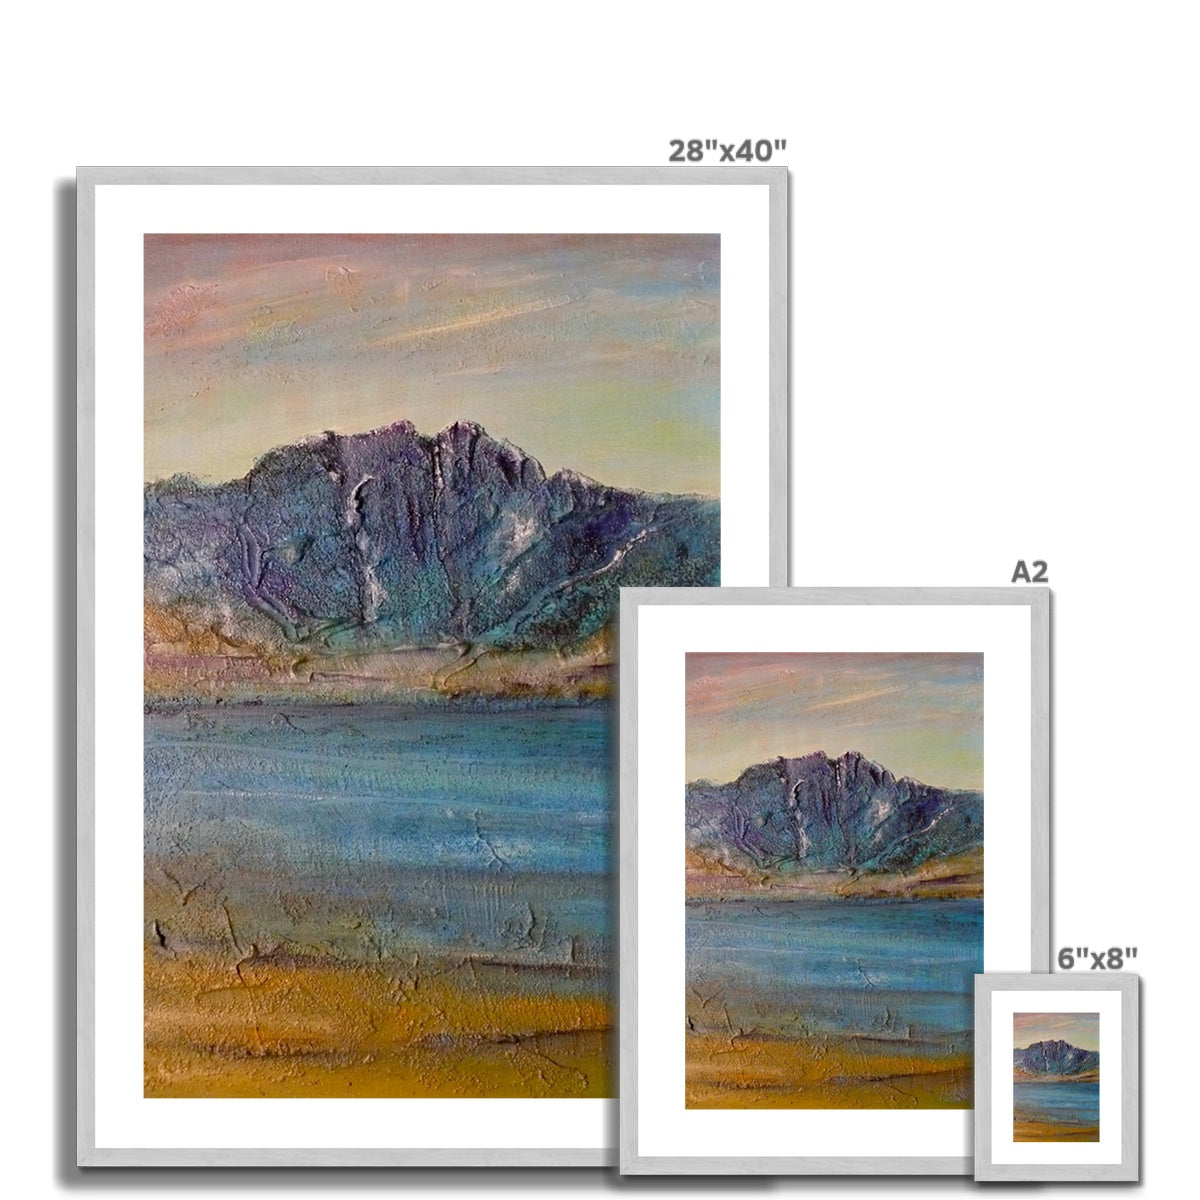 Torridon Painting | Antique Framed & Mounted Prints From Scotland-Antique Framed & Mounted Prints-Scottish Lochs & Mountains Art Gallery-Paintings, Prints, Homeware, Art Gifts From Scotland By Scottish Artist Kevin Hunter